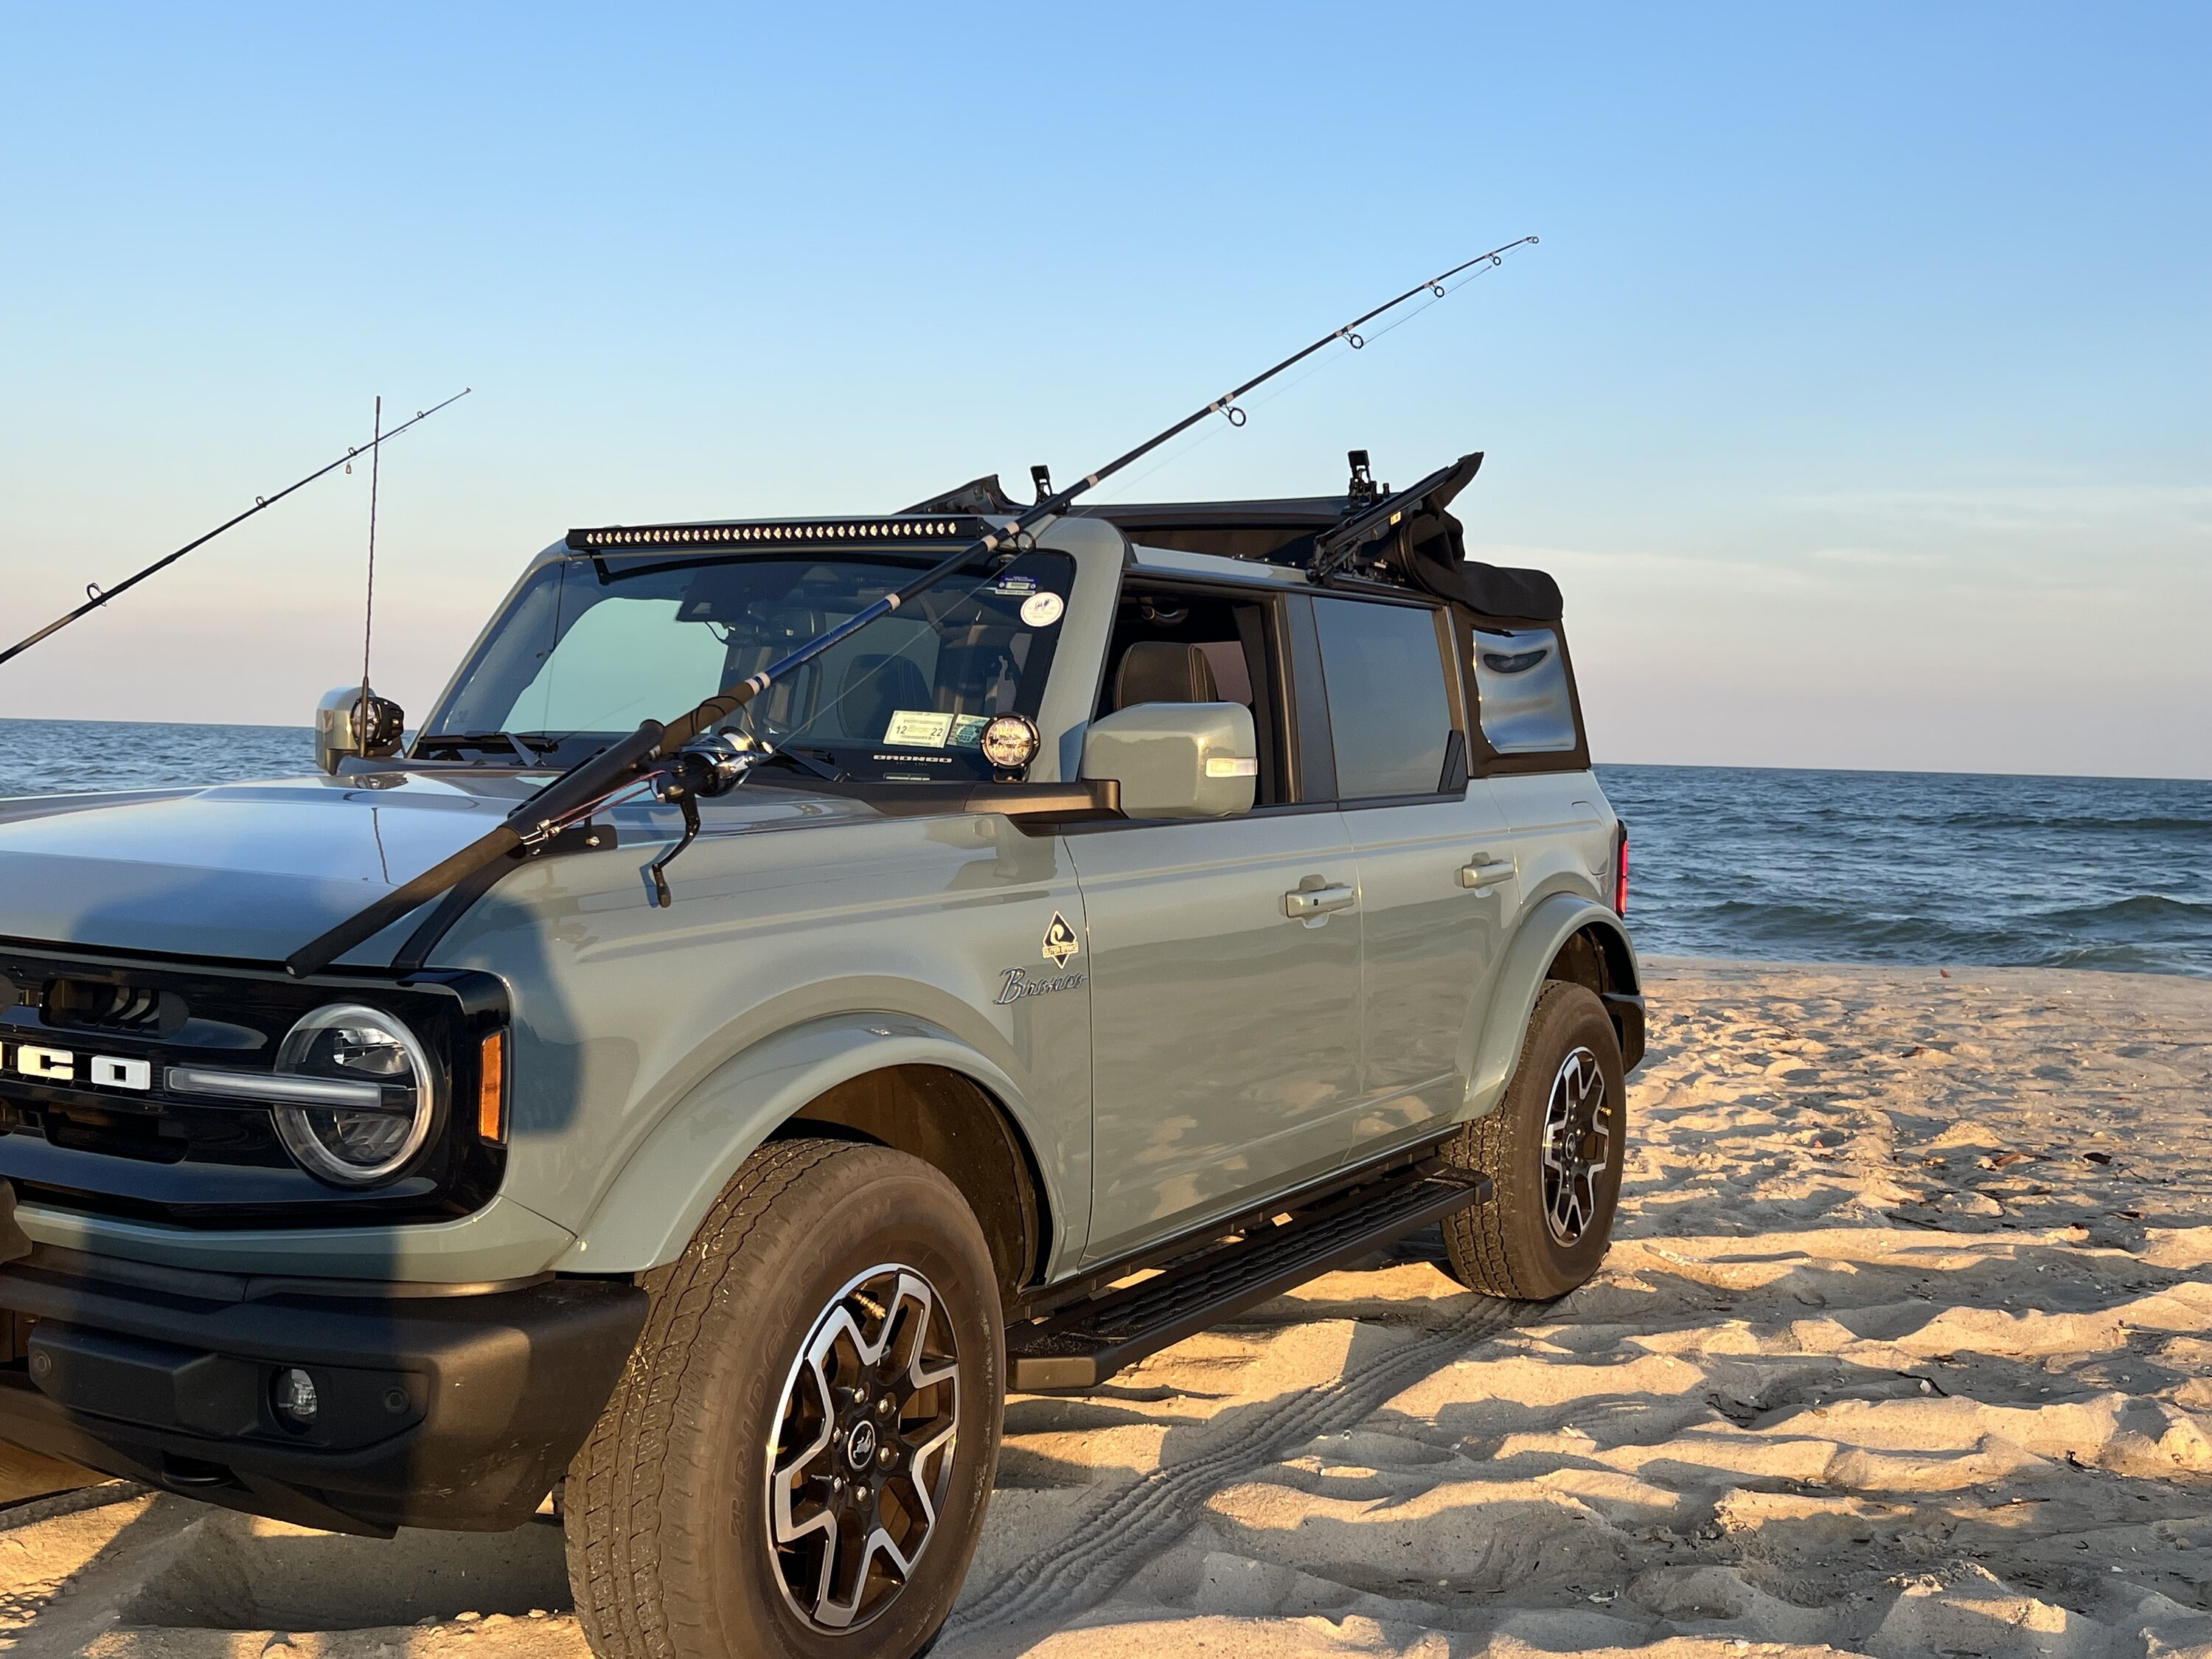 Ford Bronco Beach Builds / Surf Fishing Builds ready for the summer? Post yours! IMG_3693